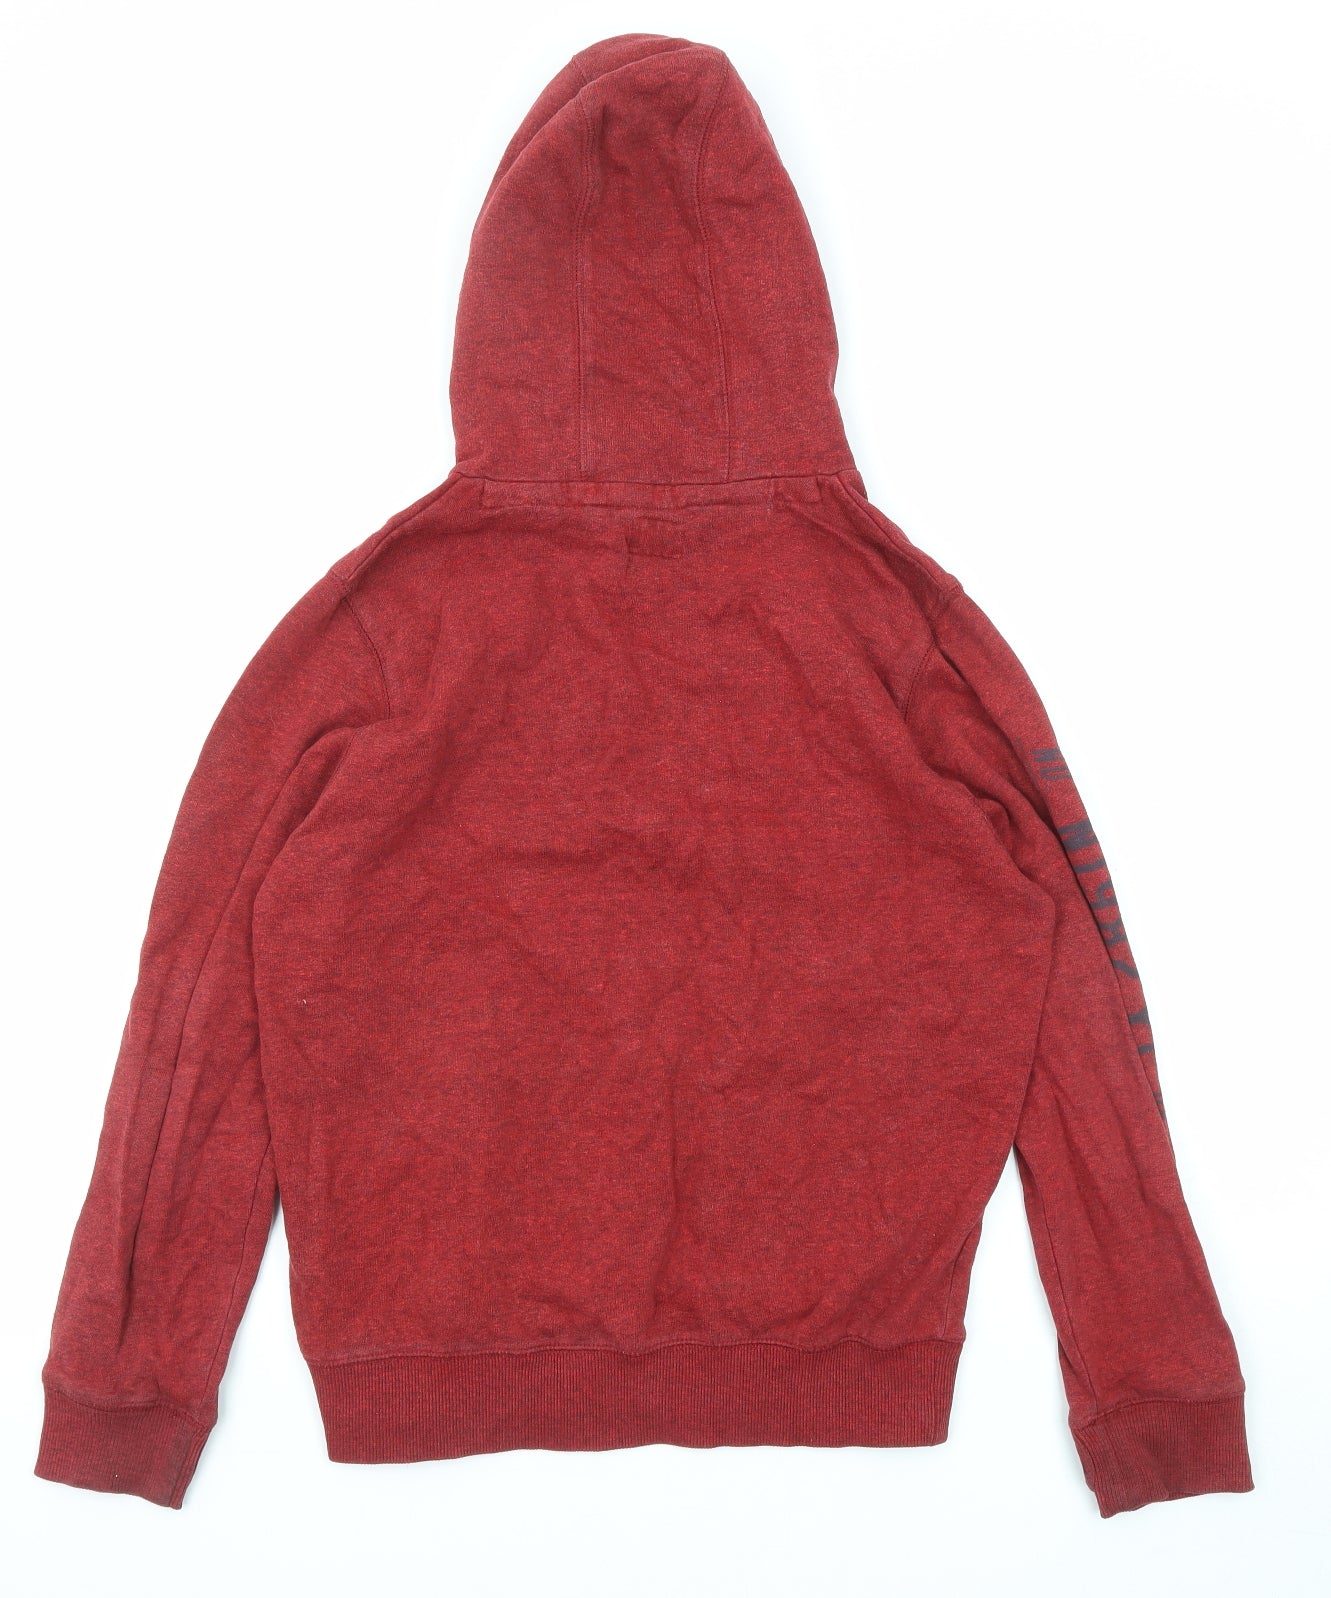 NEXT Boys Red Cotton Pullover Hoodie Size 12 Years Pullover